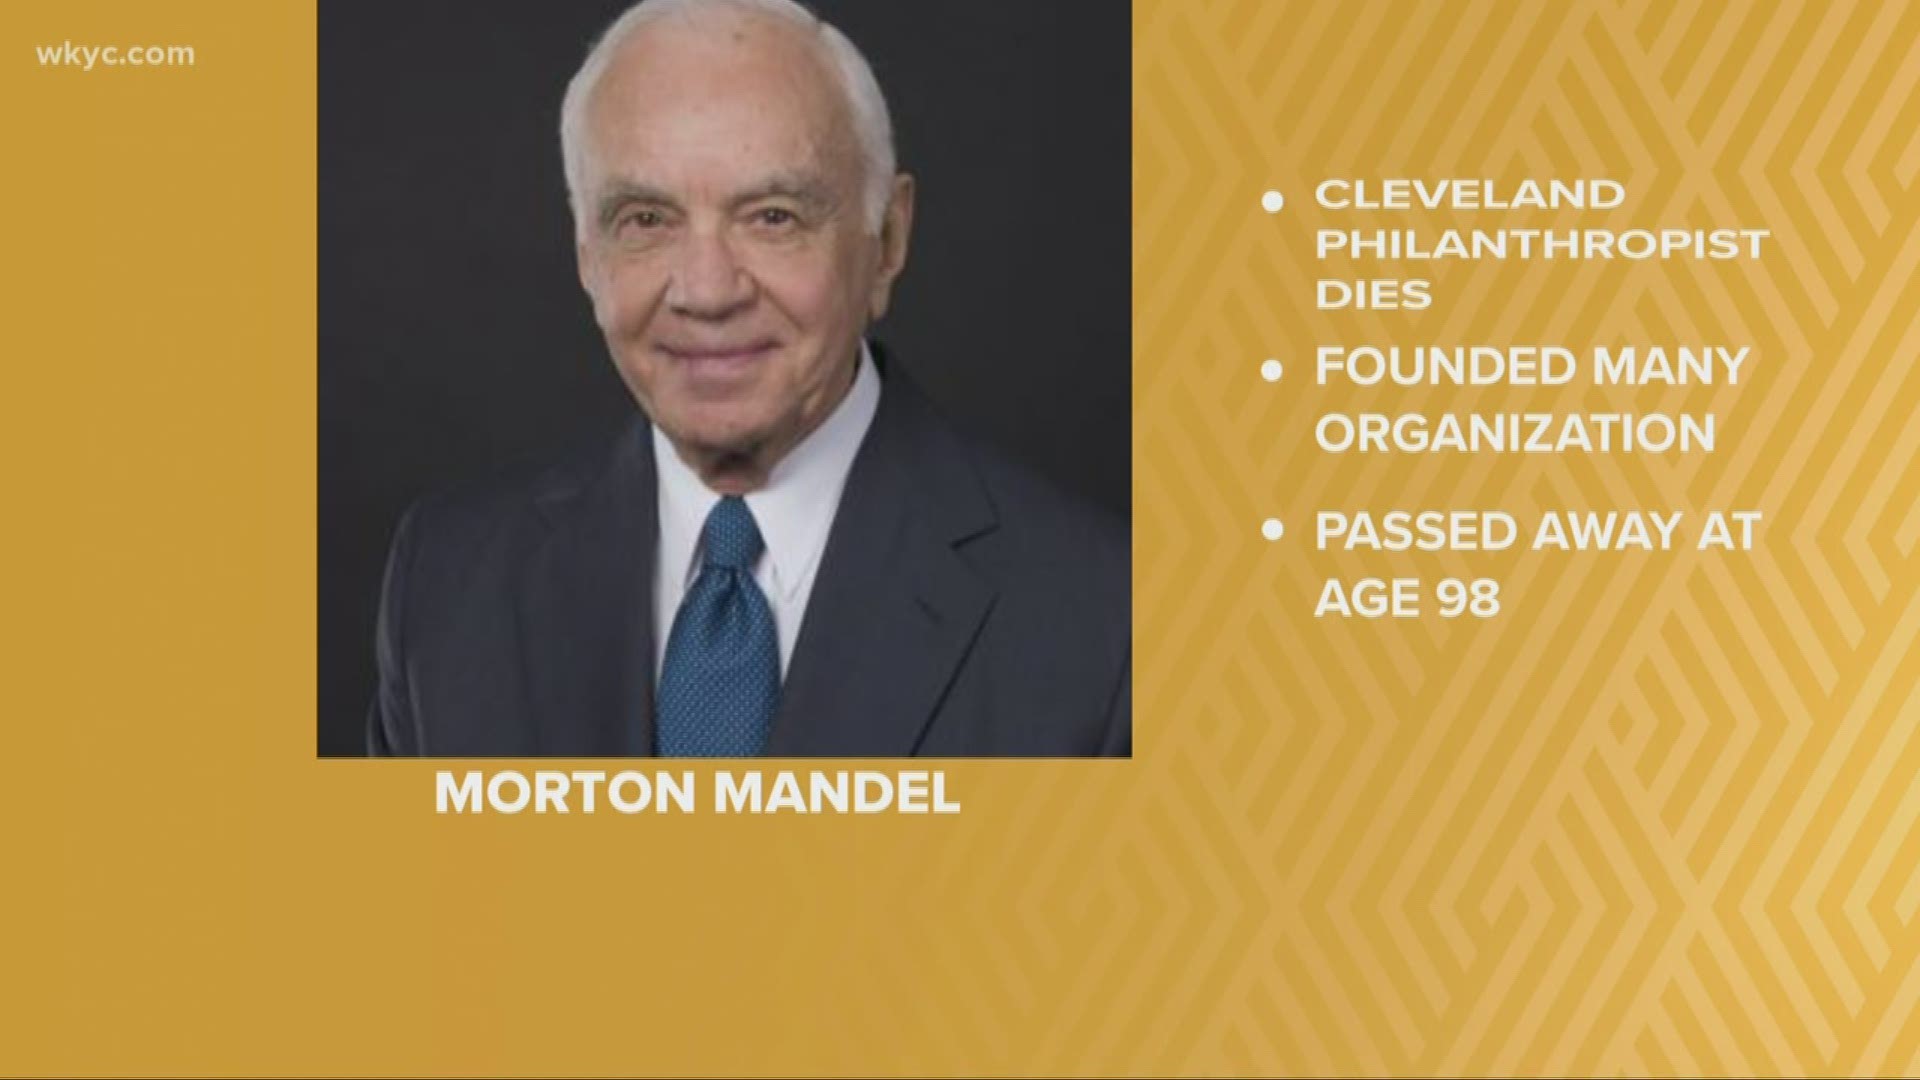 Morton Mandel, whose entrepreneurship and philanthropy impacted Cleveland and the world for generations, has died at the age of 98.